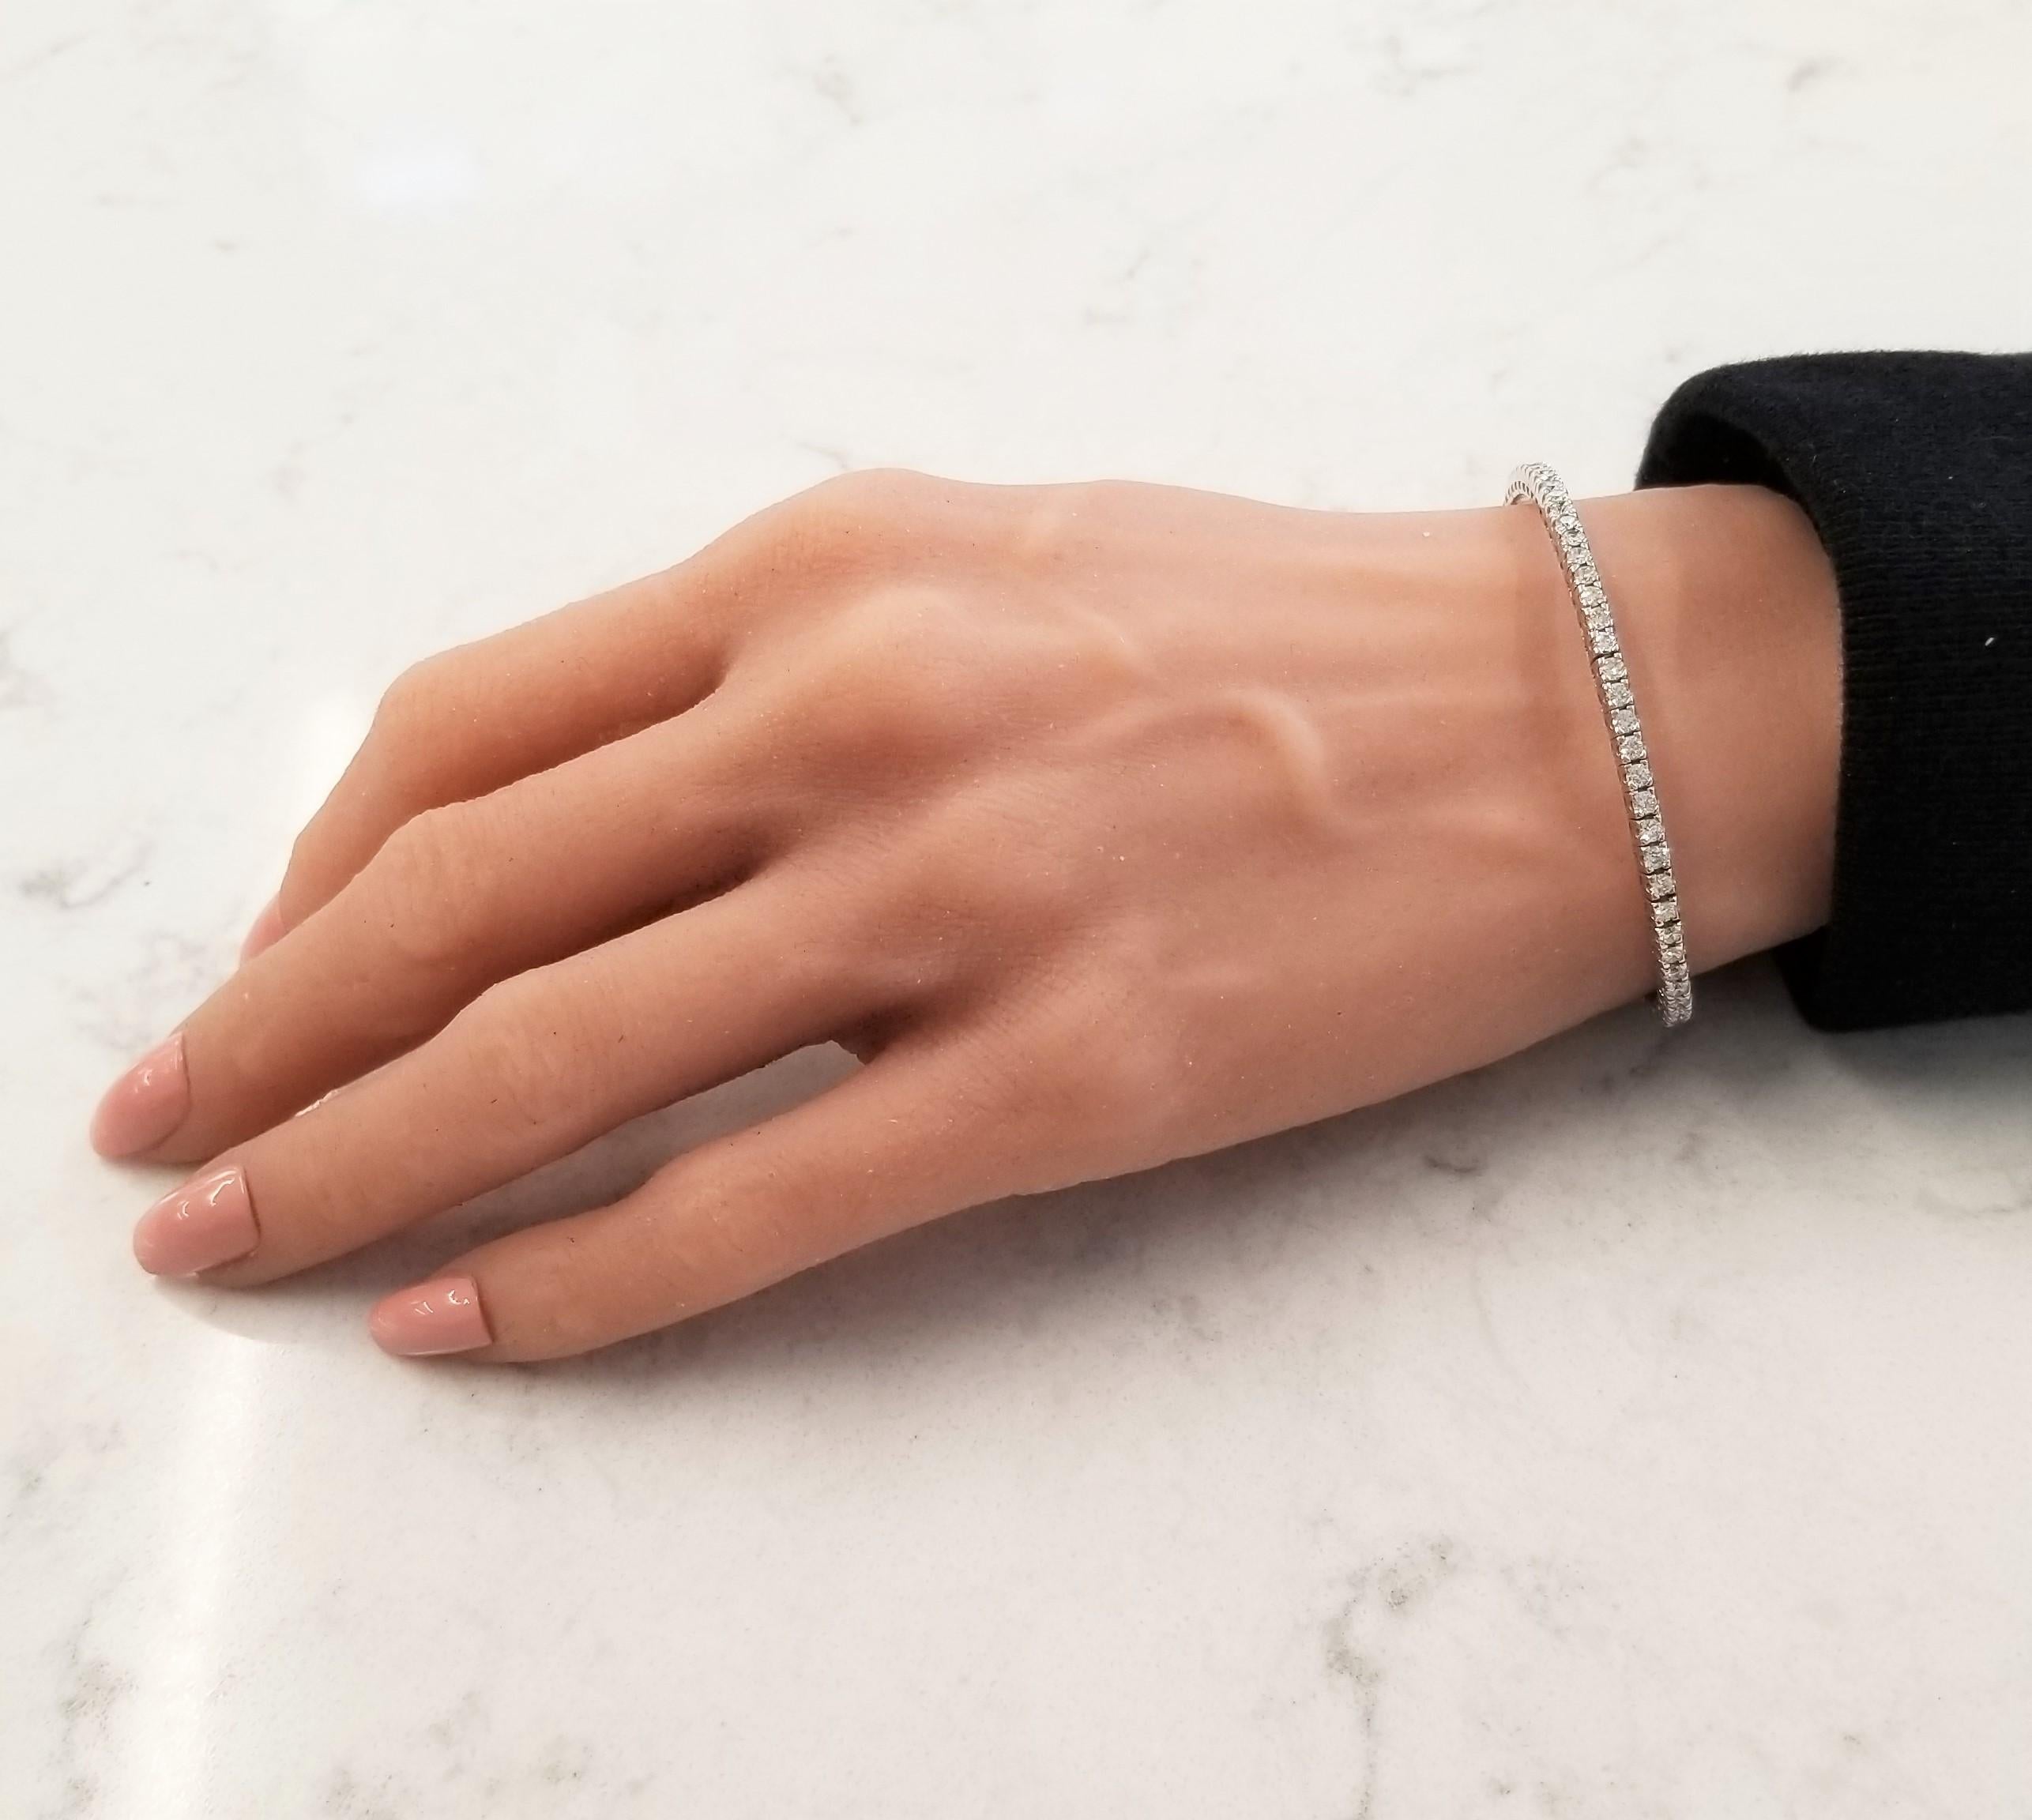 This lavish stretchy bangle bracelet features a sparkling row of round brilliant cut diamonds expertly prong set in modern square-shaped links. Each diamond sits next to each other, set from end to end eternity style displaying maximum fire and